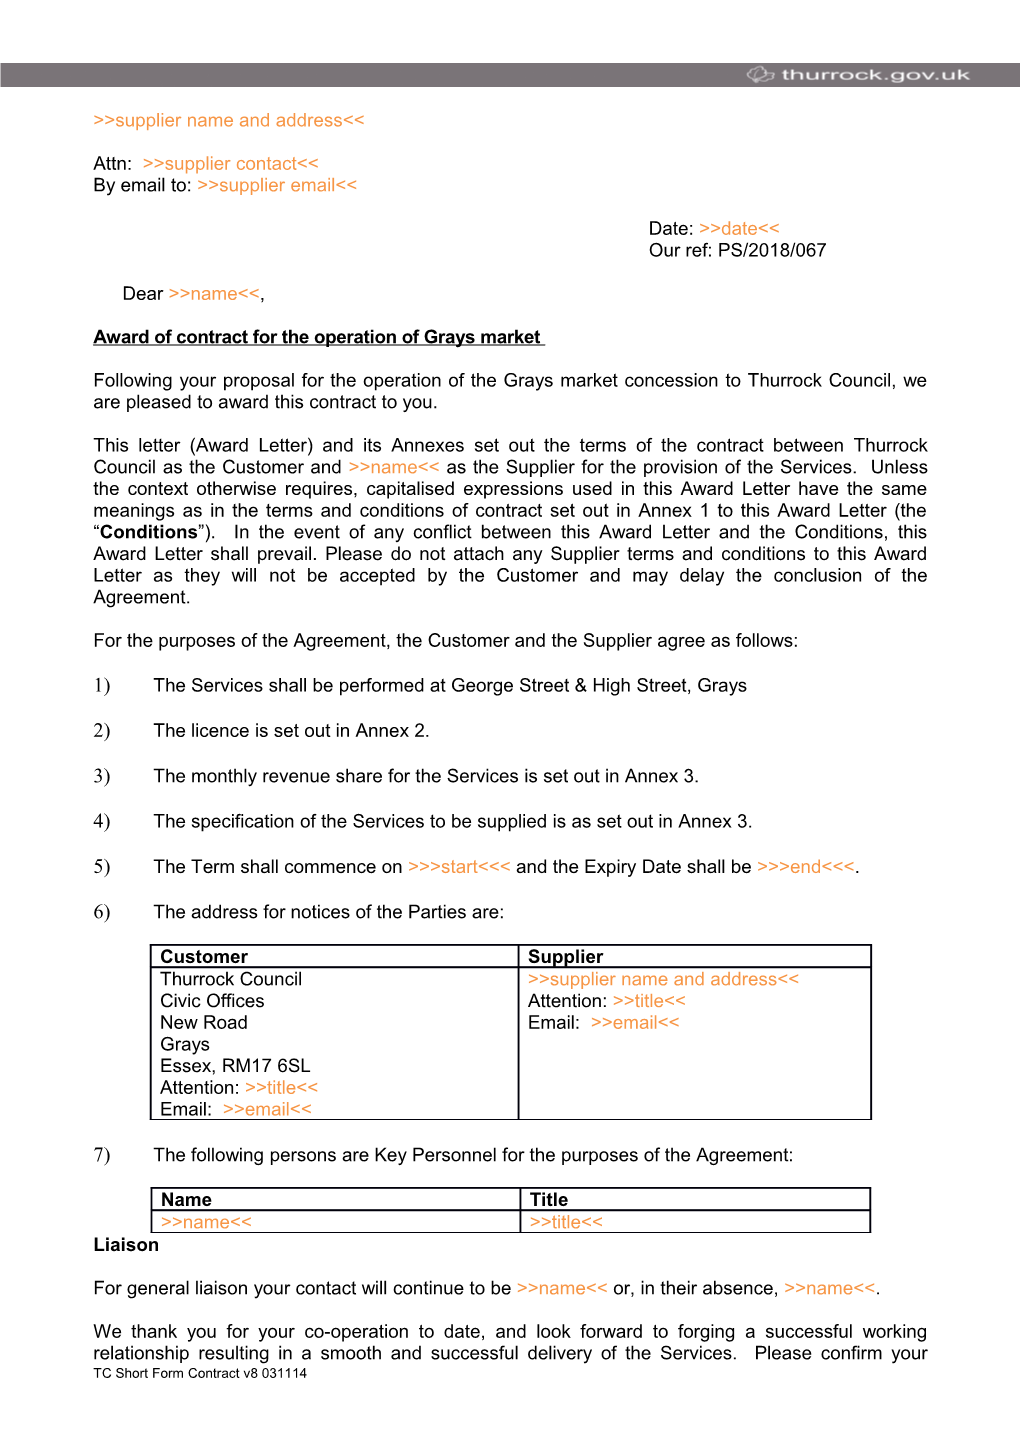 Thurrock Council - Invitation to Tender, PS/2018/067